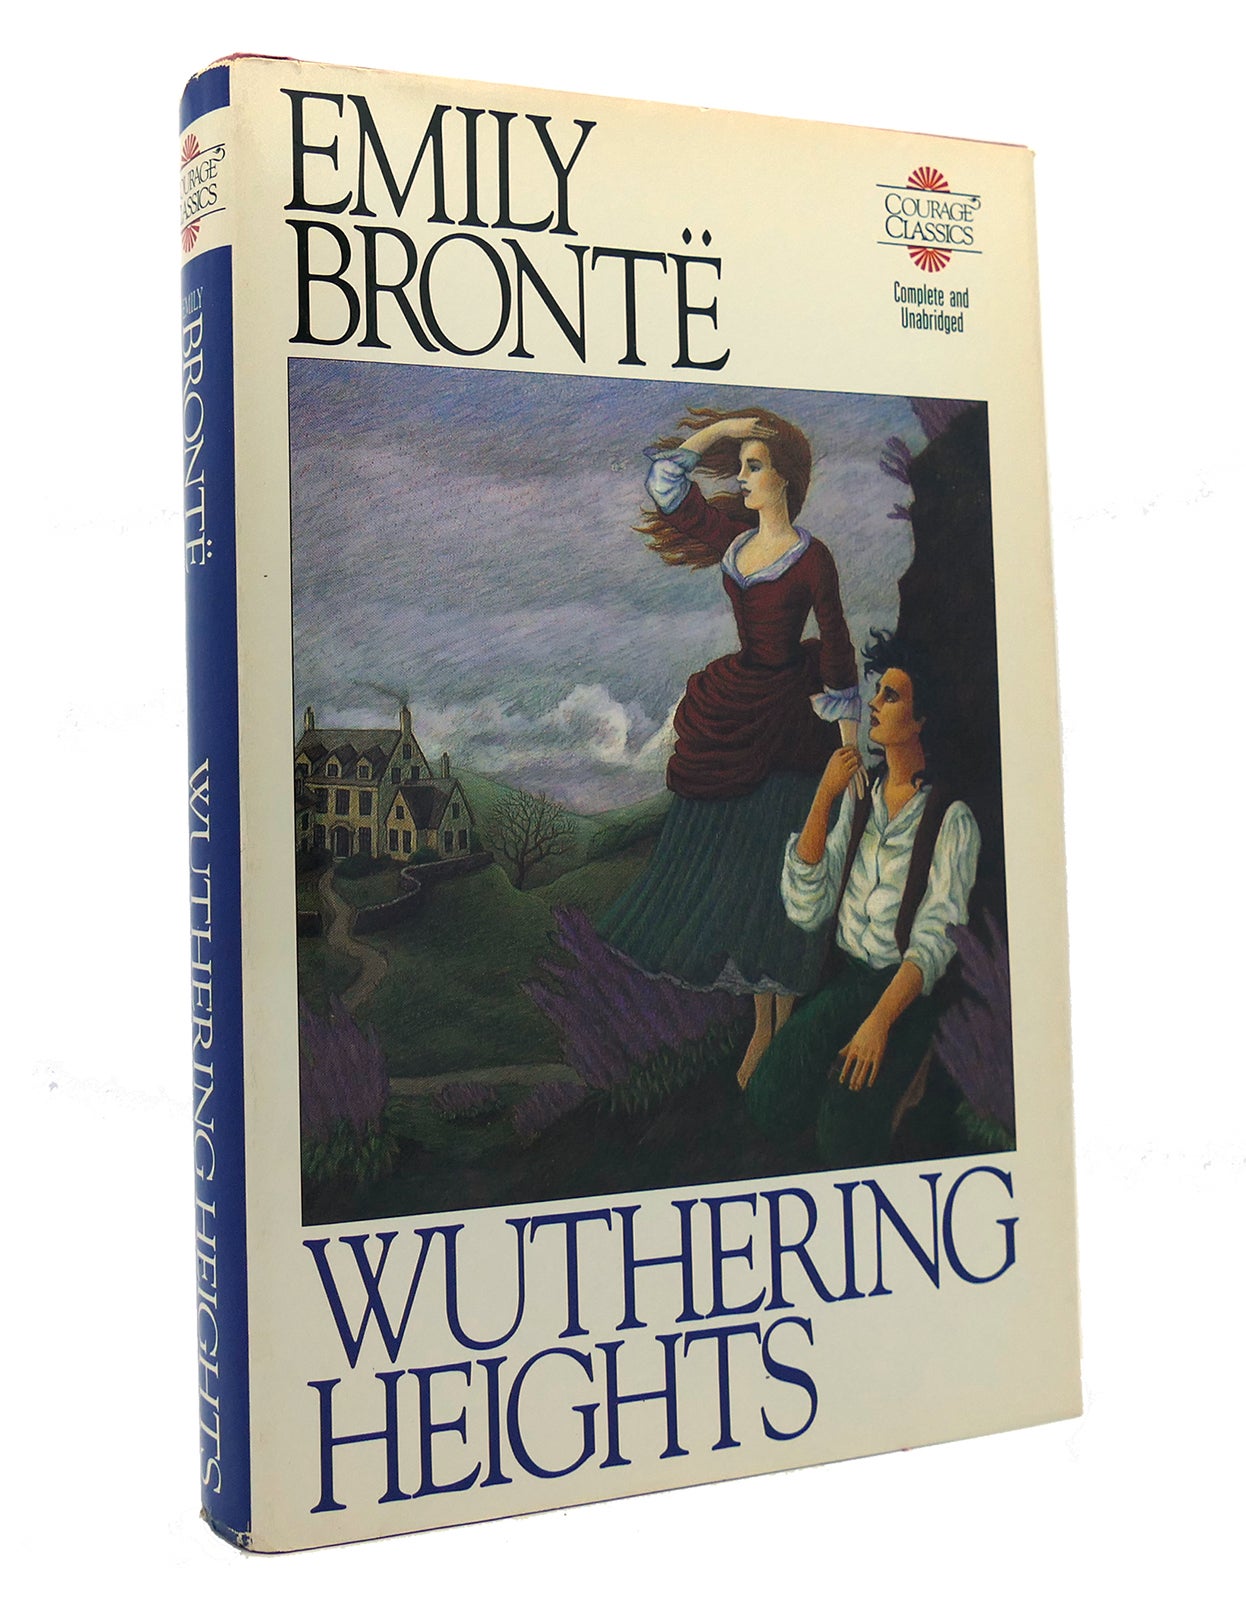 WUTHERING HEIGHTS Emily Bronte Complete And Unabridged; Fifth Printing